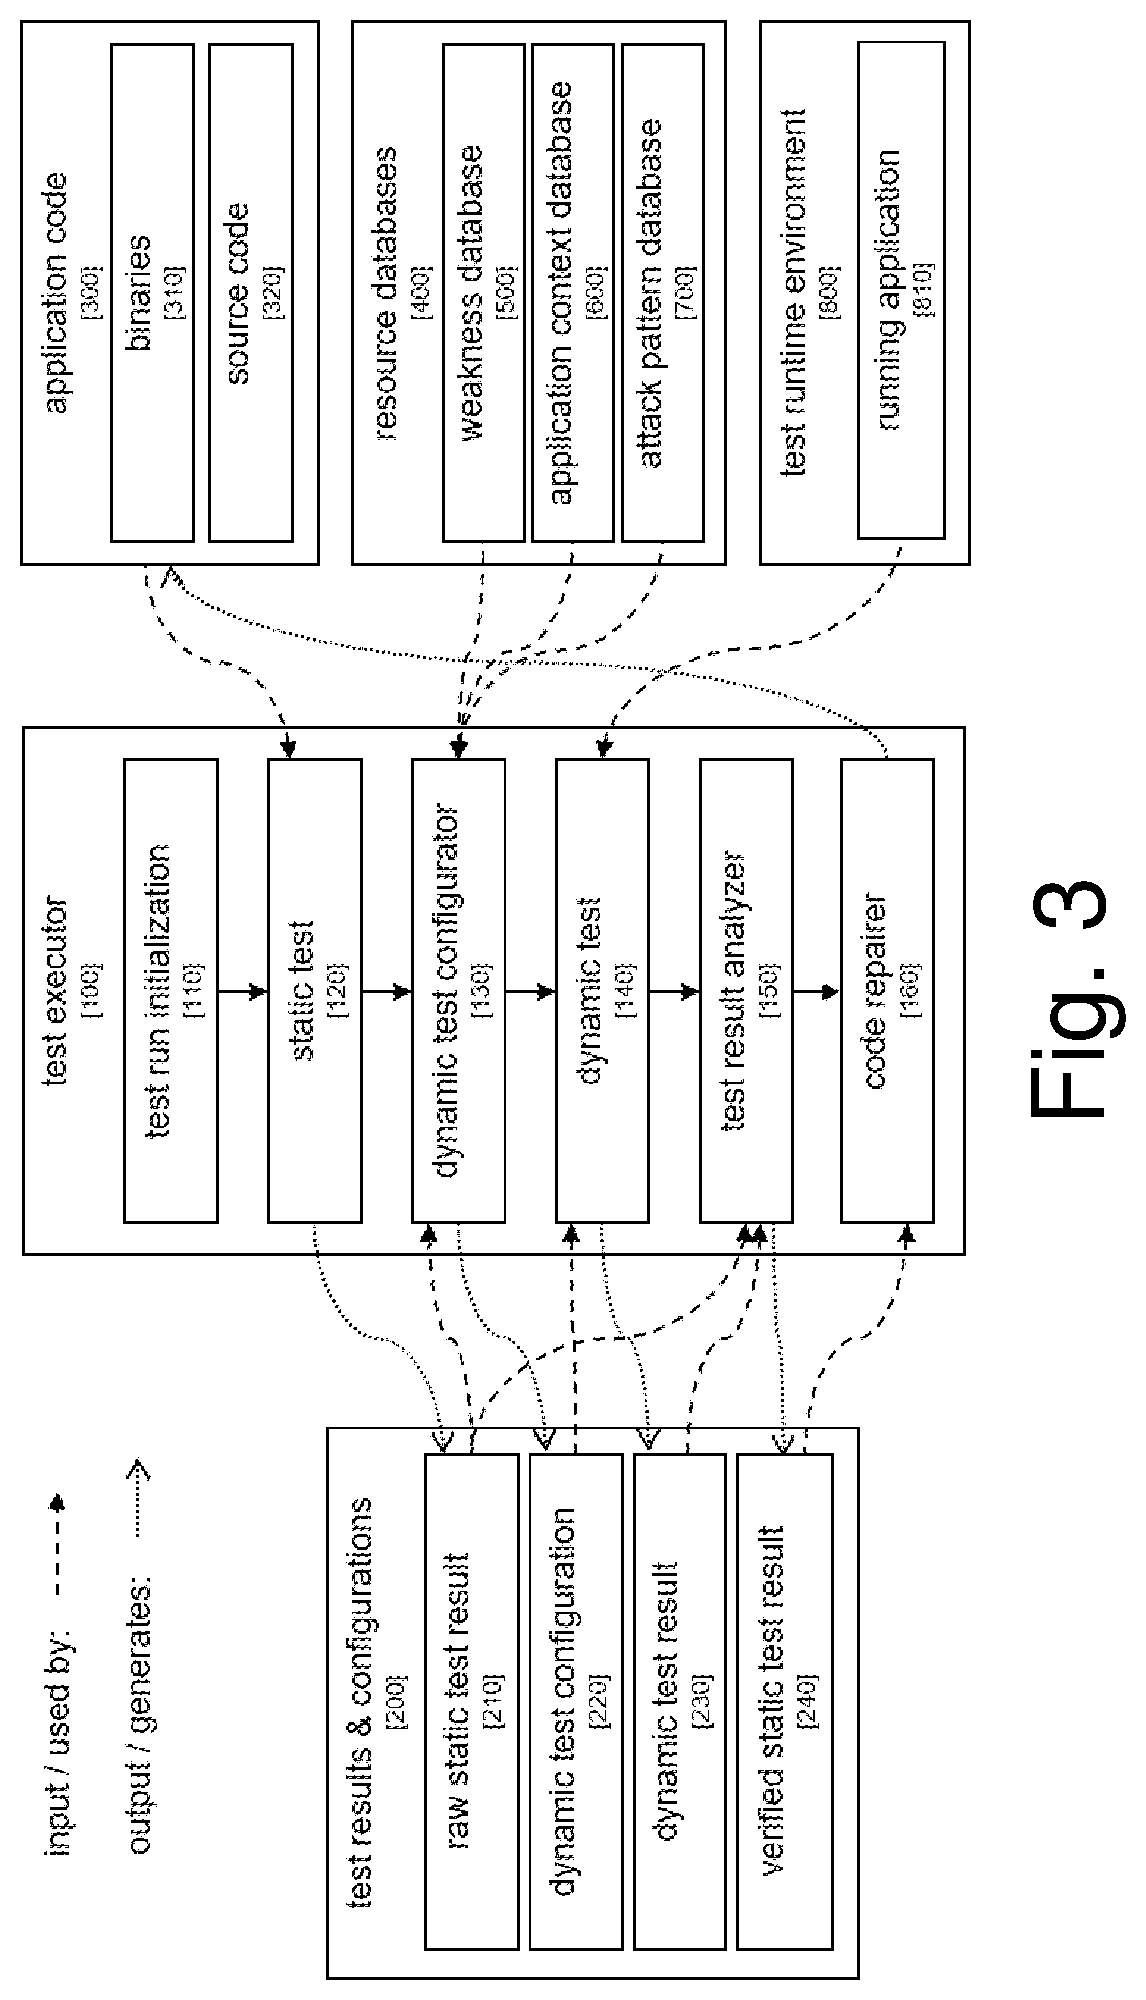 Systems and/or methods for static-dynamic security testing using a test configurator to identify vulnerabilities and automatically repair defects